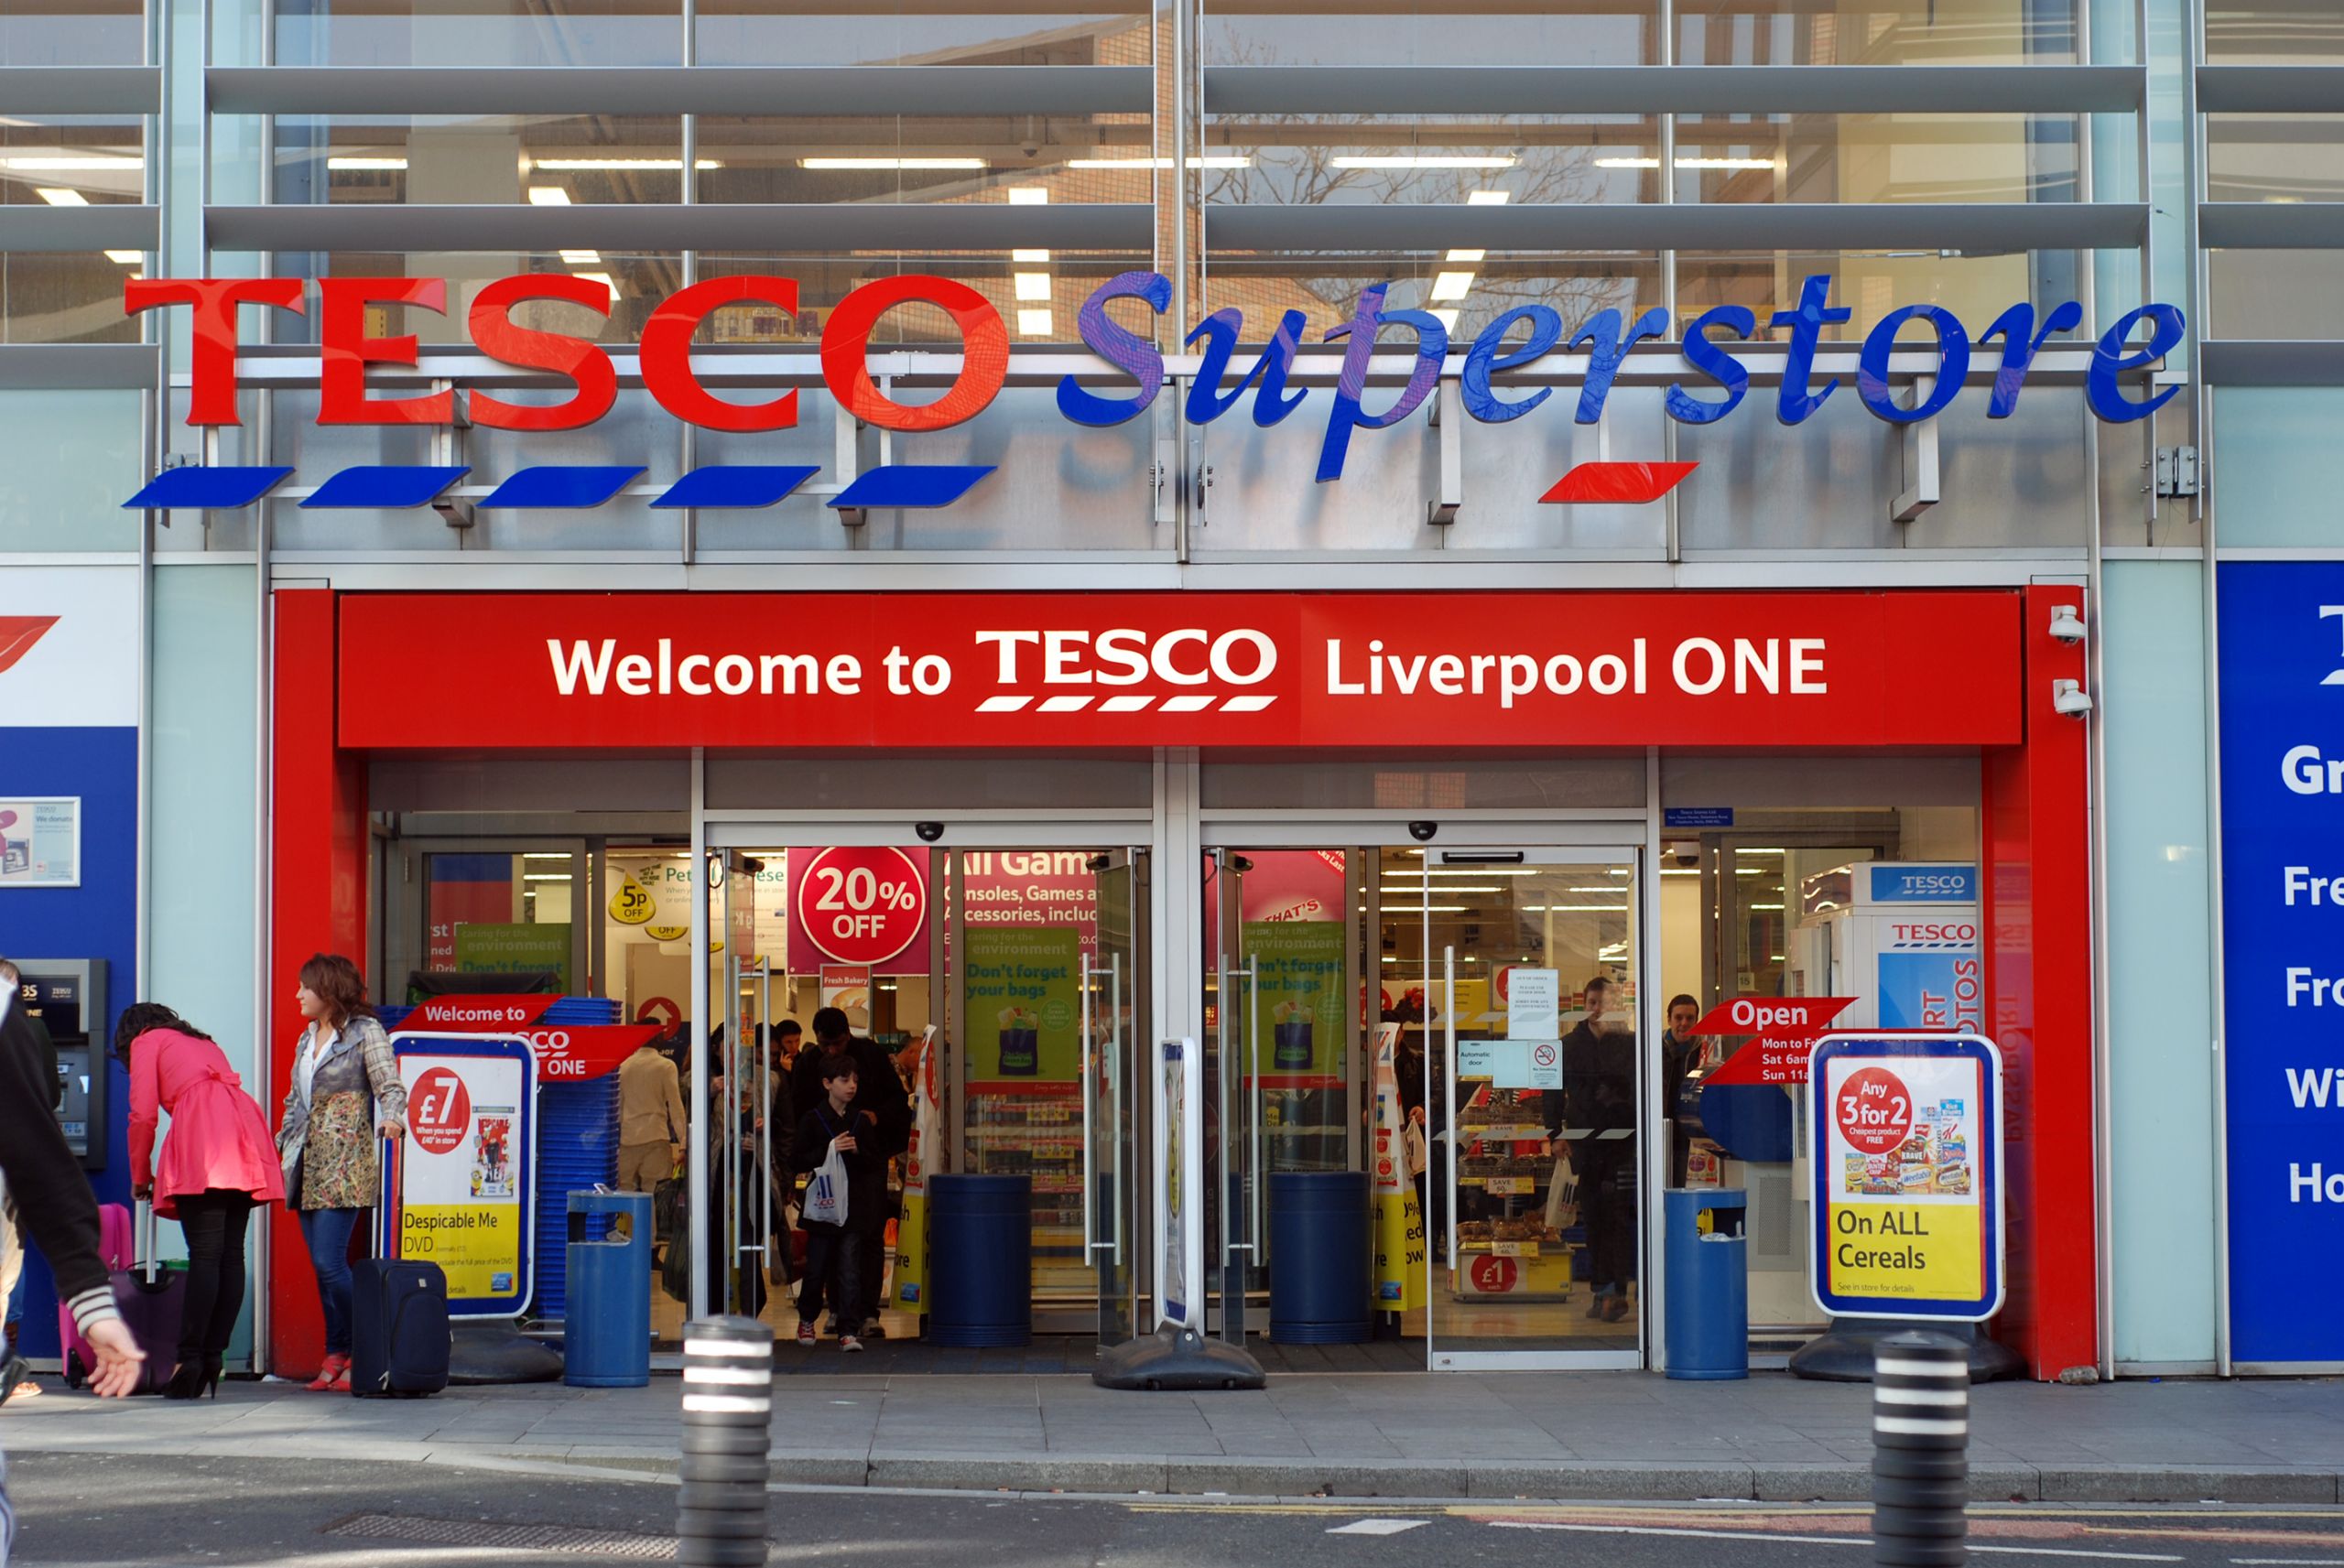 Tesco sees a big future in plant-based meat